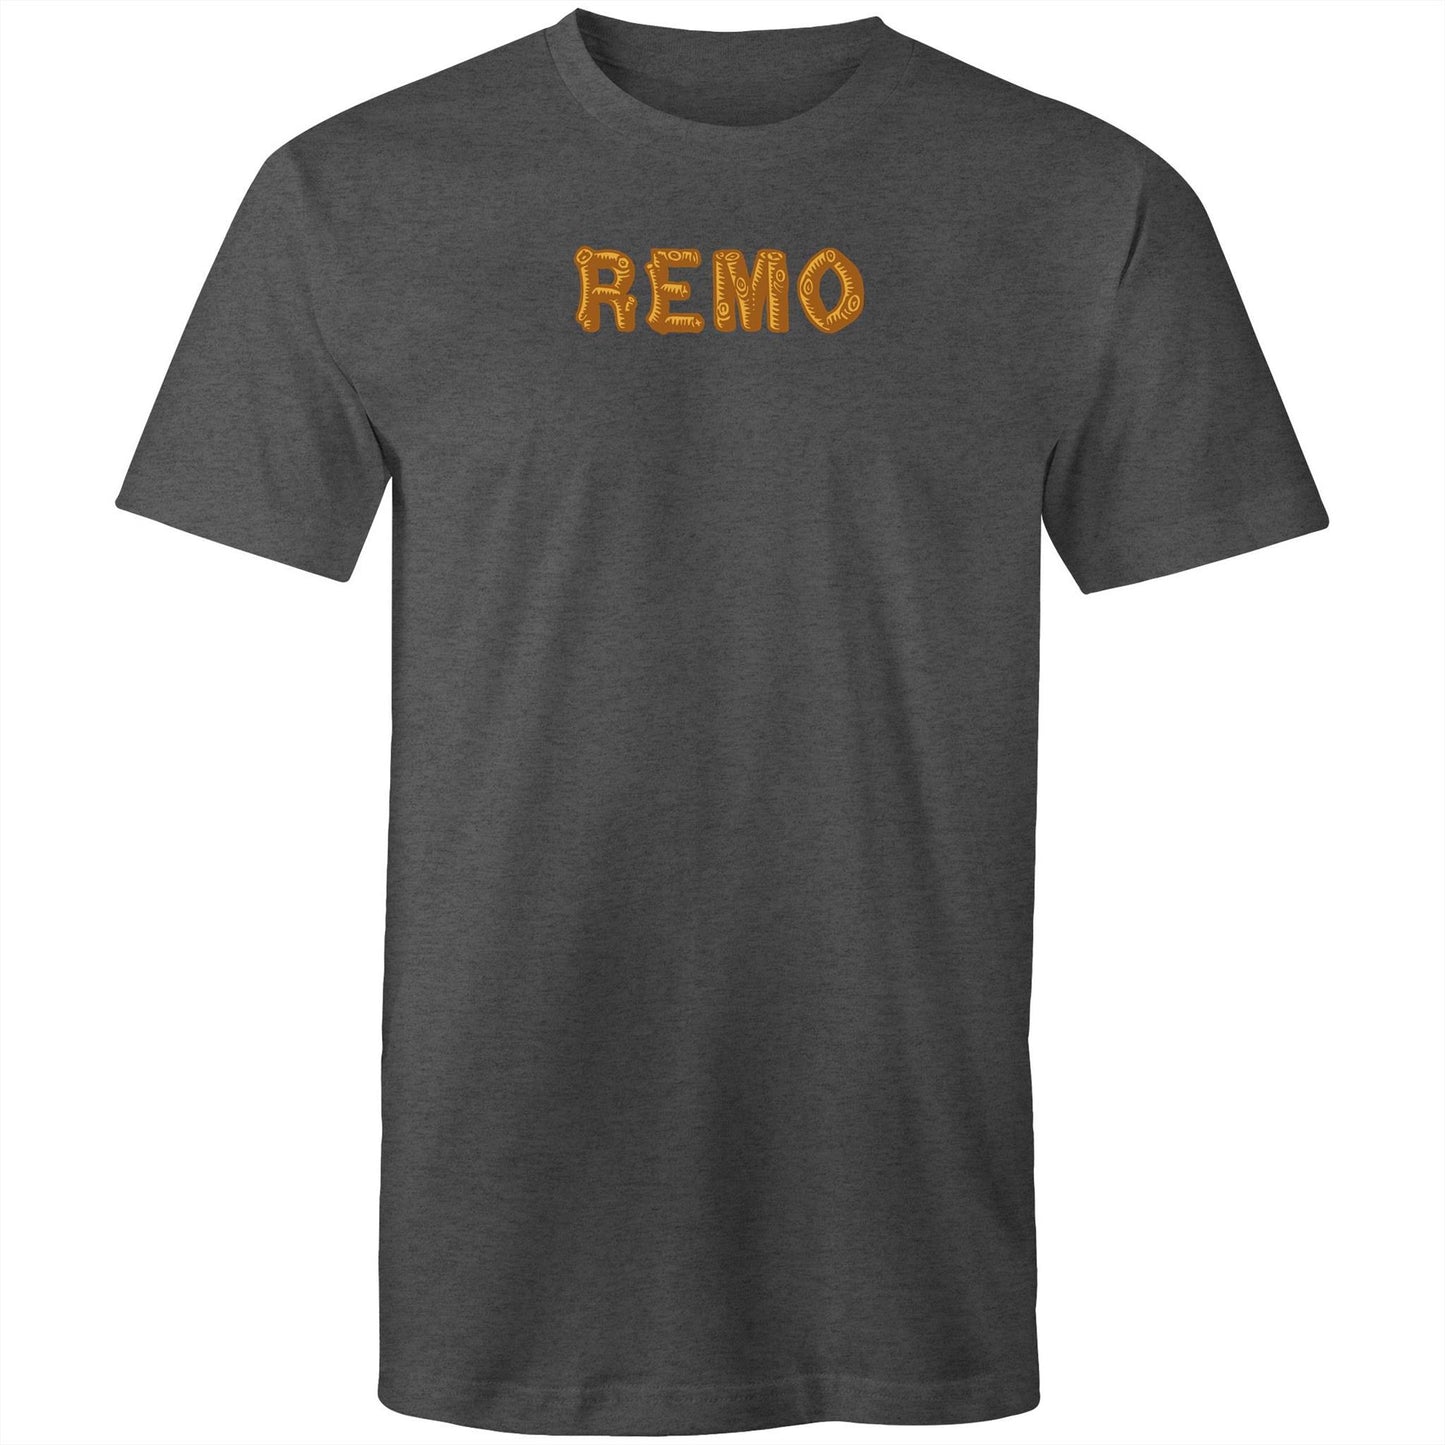 Camp REMO T Shirts for Men (Unisex)